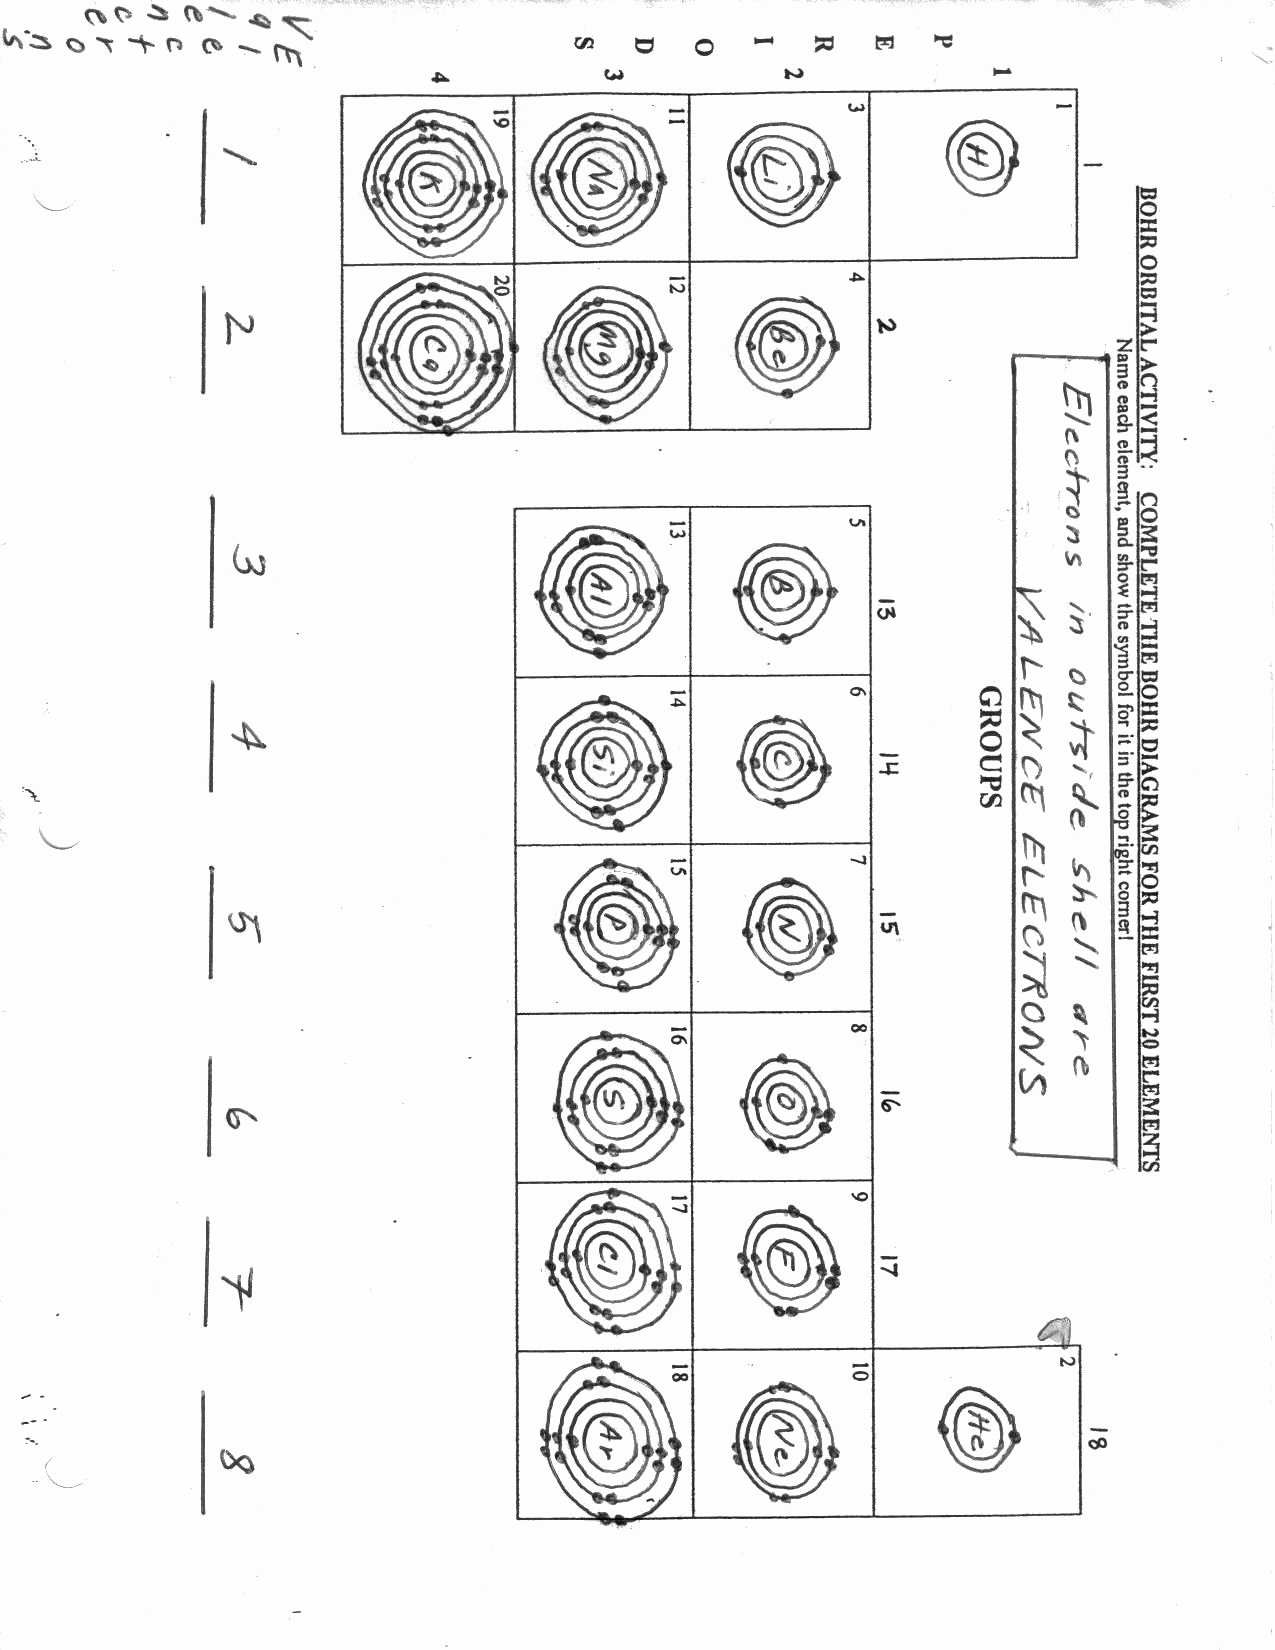 Drawing atoms Worksheet Answer Key Awesome Blank Bohr Model Worksheet Blank Fill In for First 20